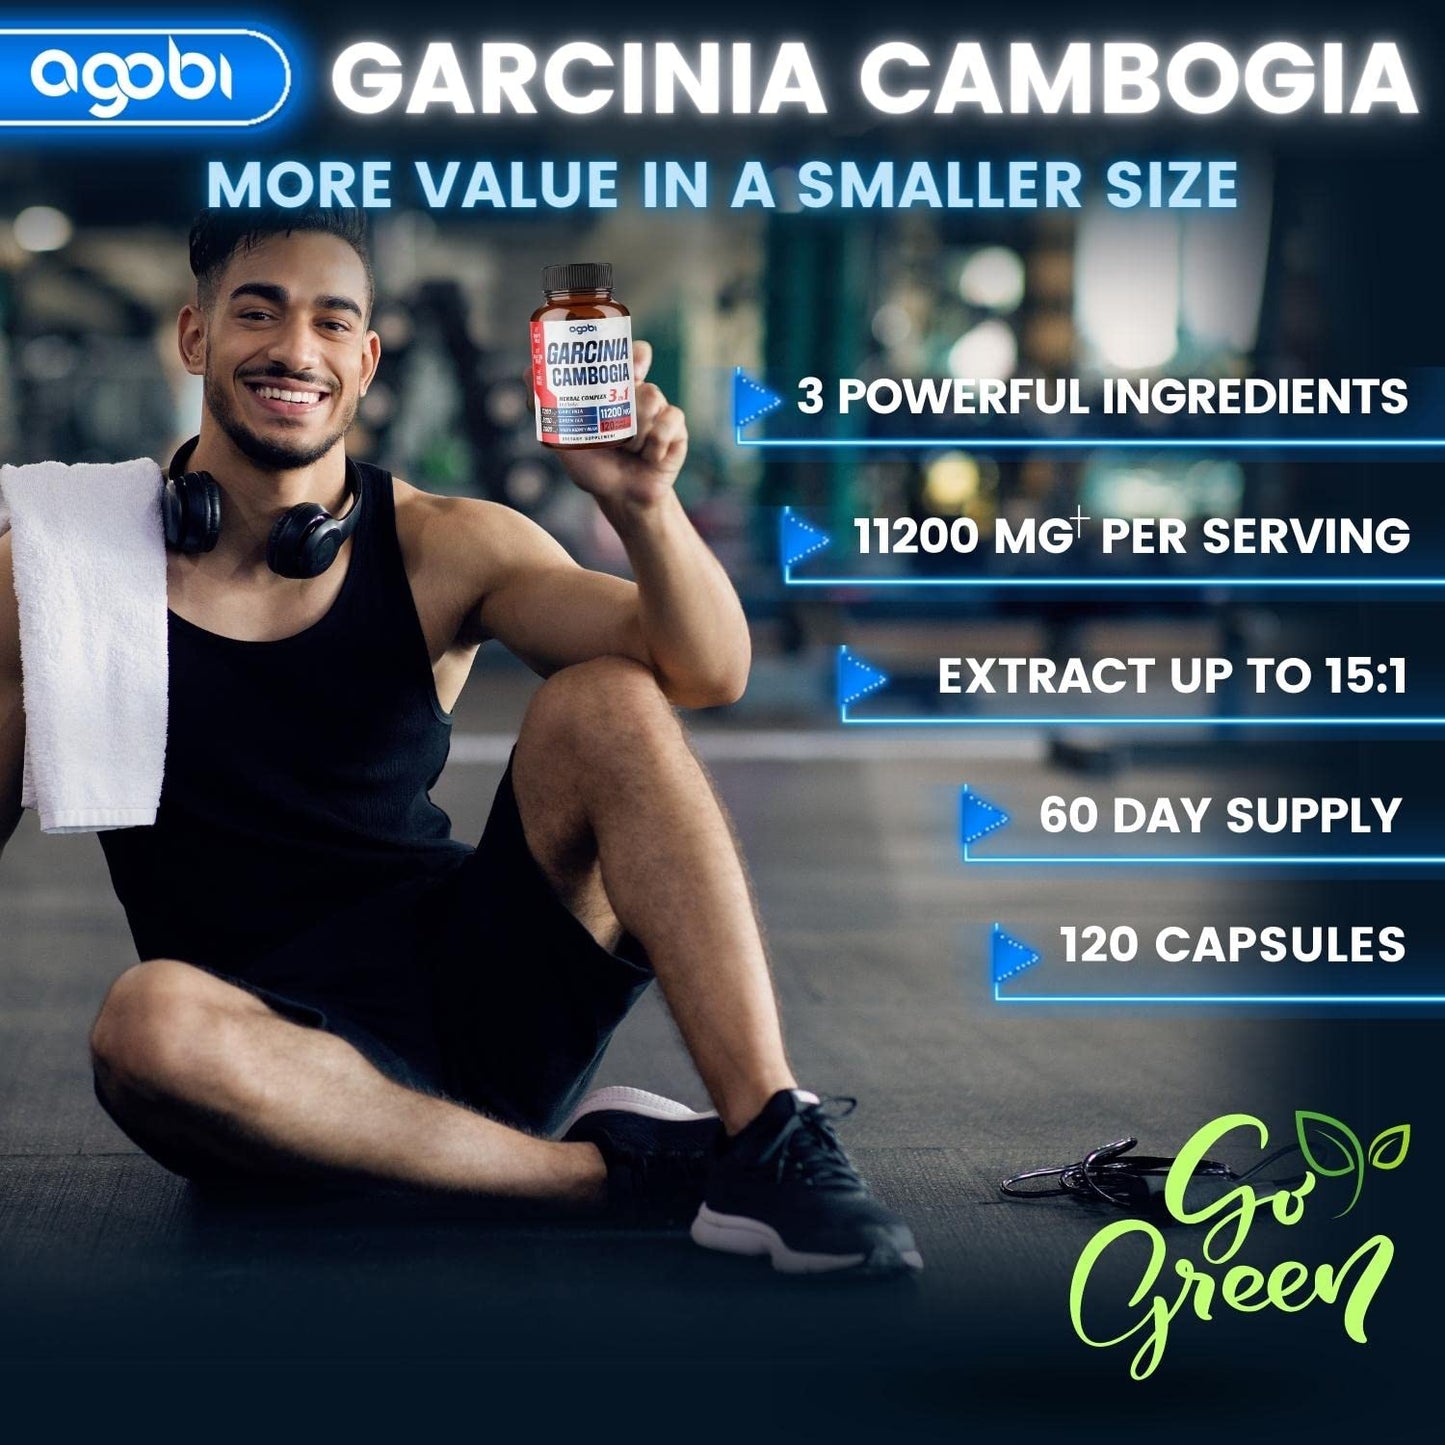 agobi 3in1 Garcinia Cambogia Extract Capsules - 11200mg Herbal Supplement for Body Health